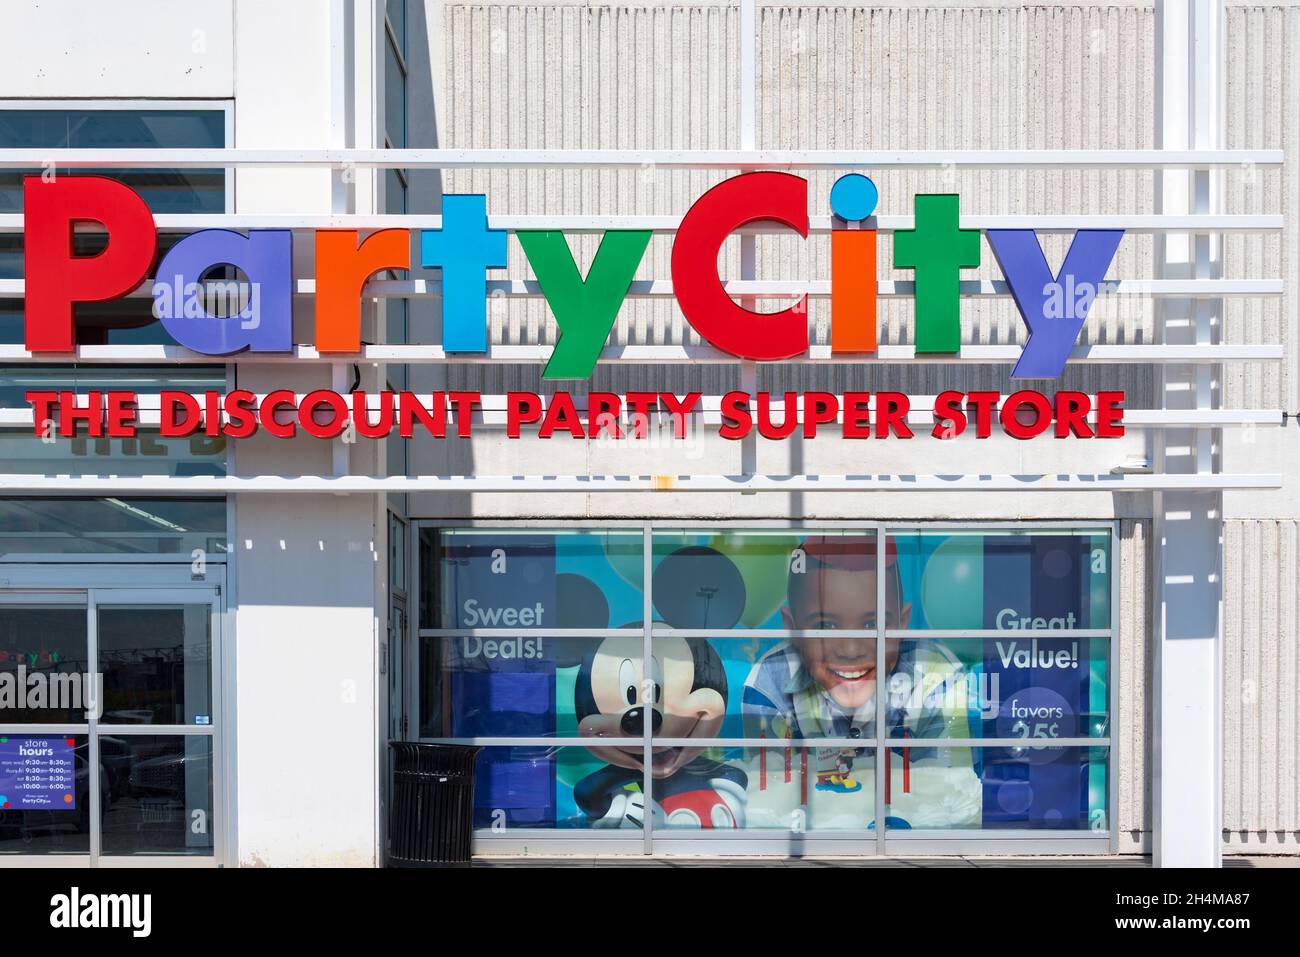 Entrance sign to a Party City retail store in Toronto Canada. Nov. 2, 2021 Stock Photo